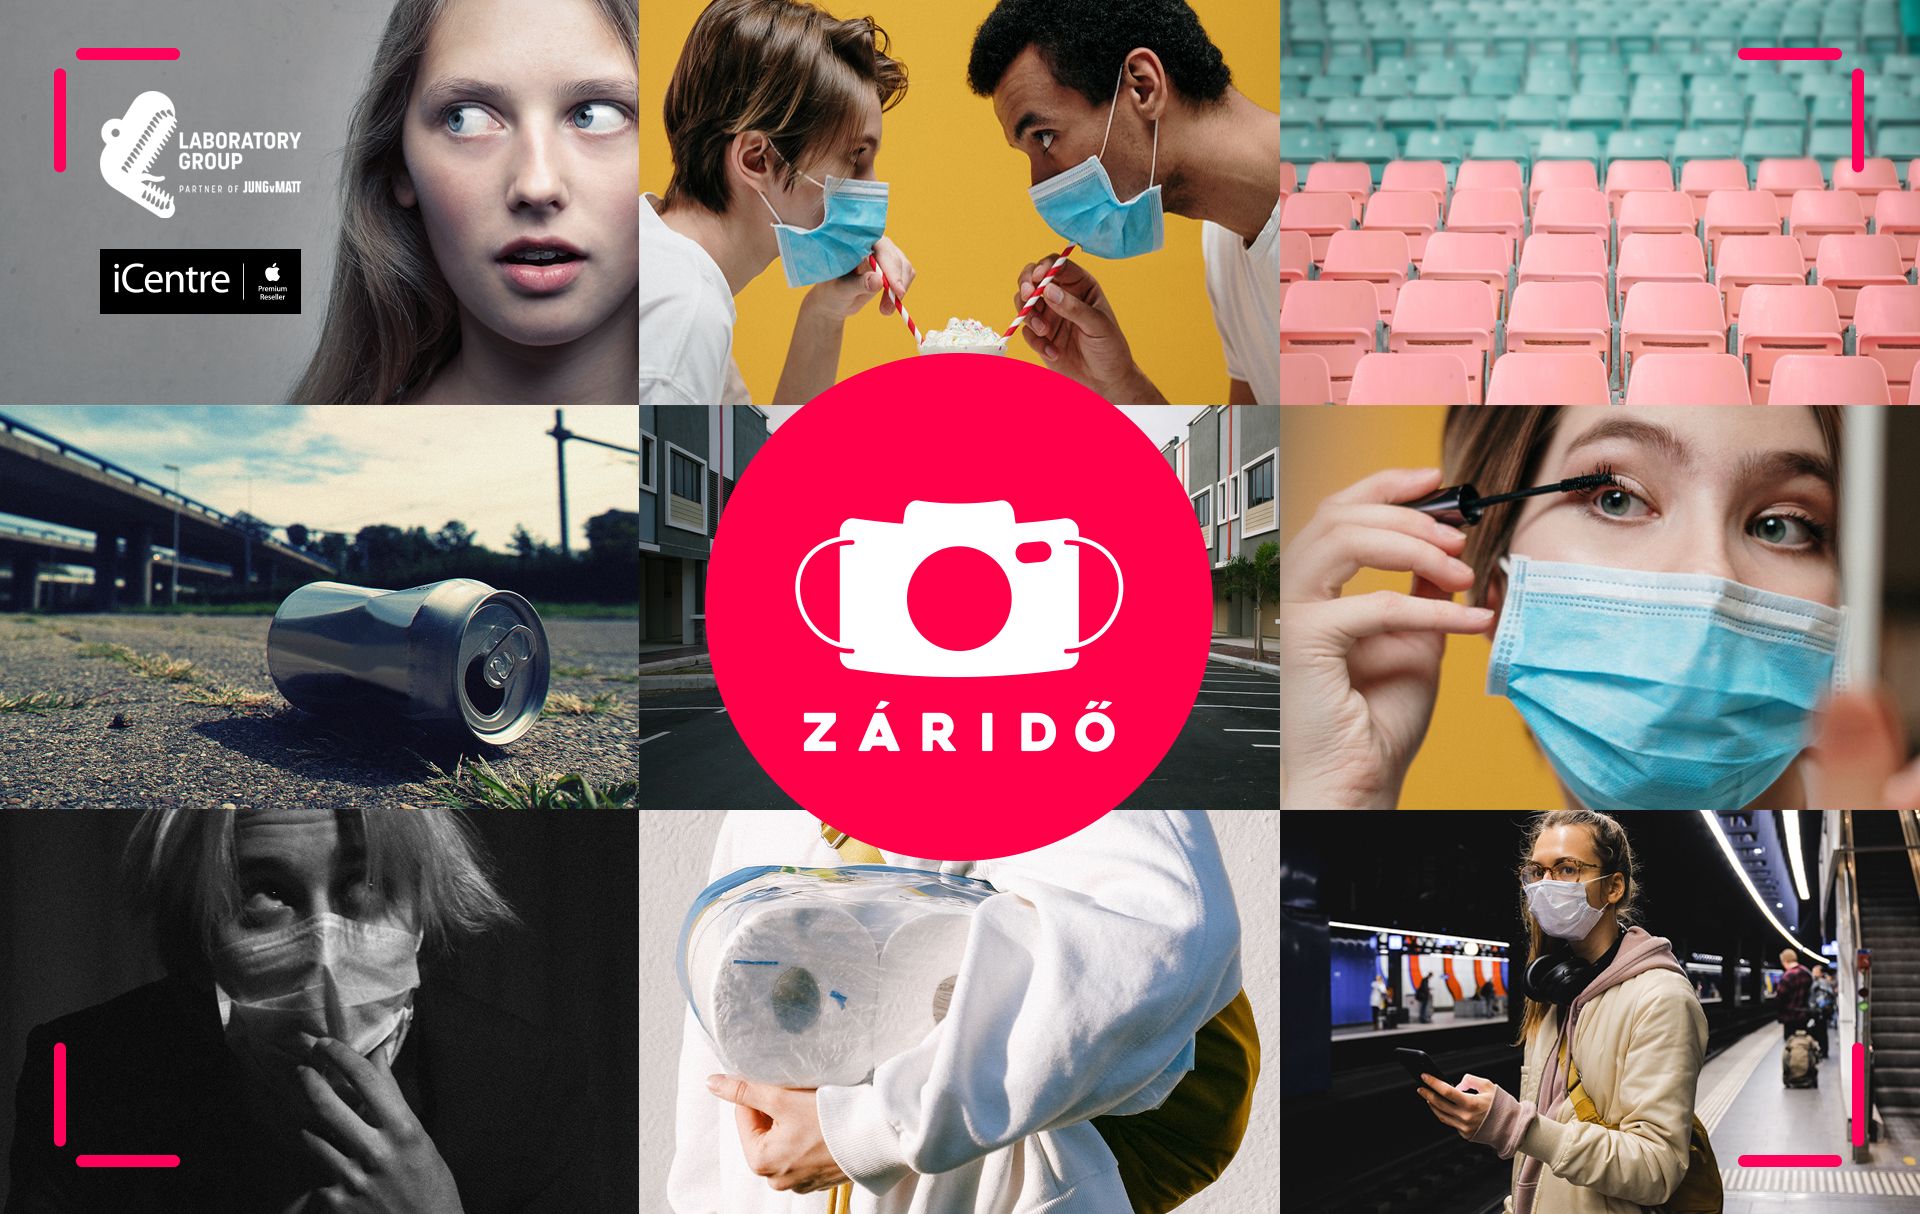 Záridő photo competition | Laboratory Group